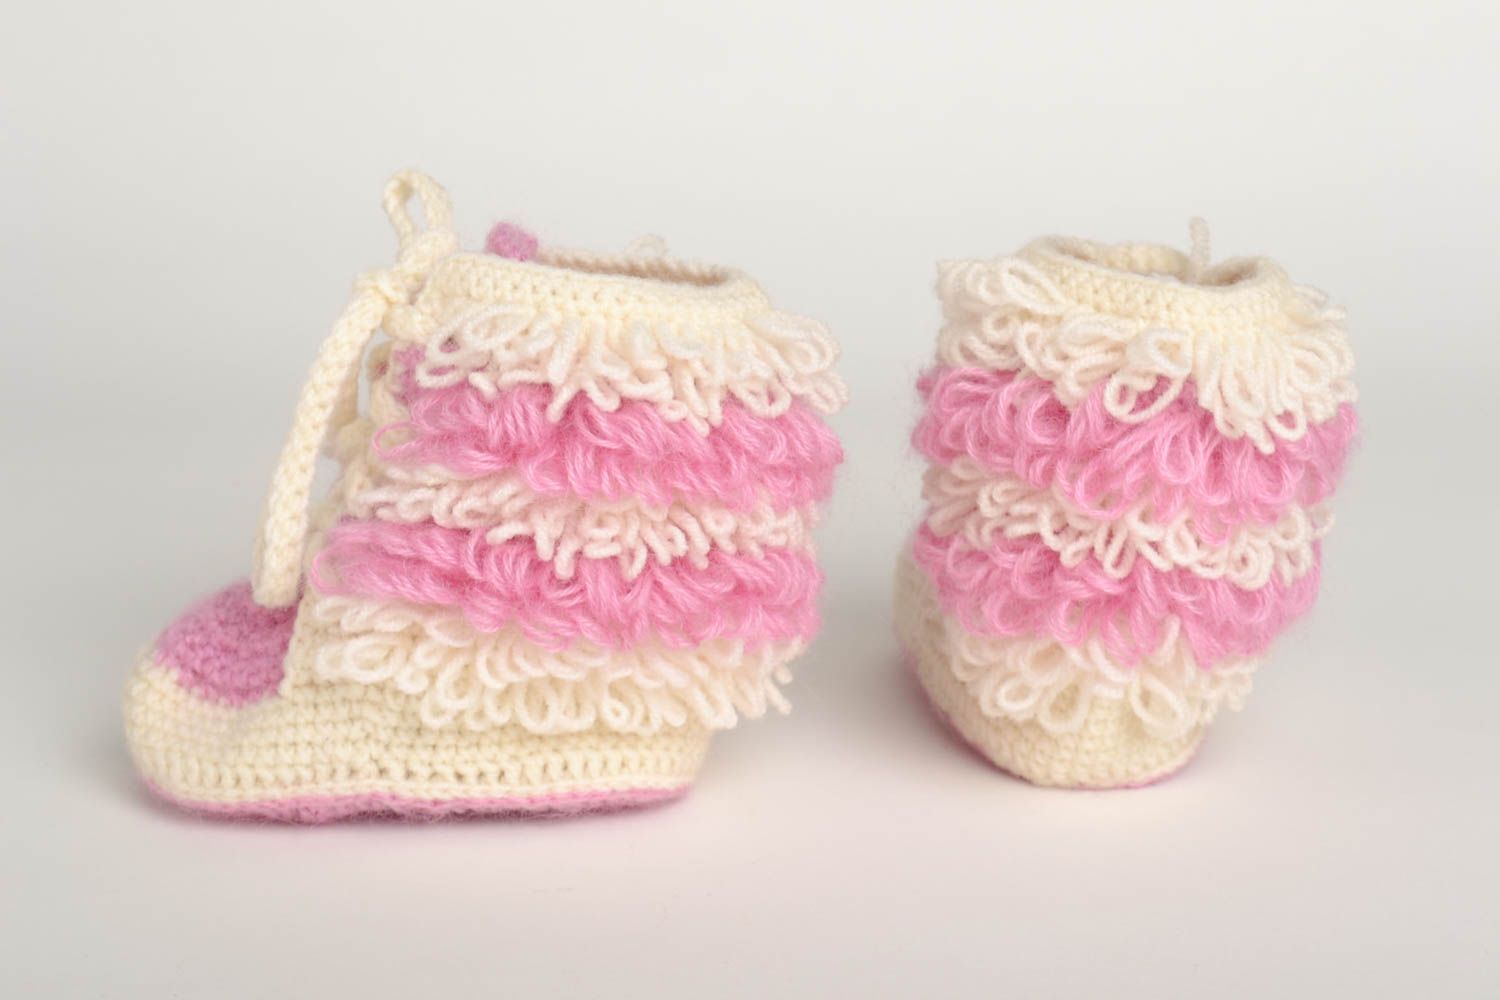 Handmade crochet baby booties baby bootees design fashion accessories for kids photo 4